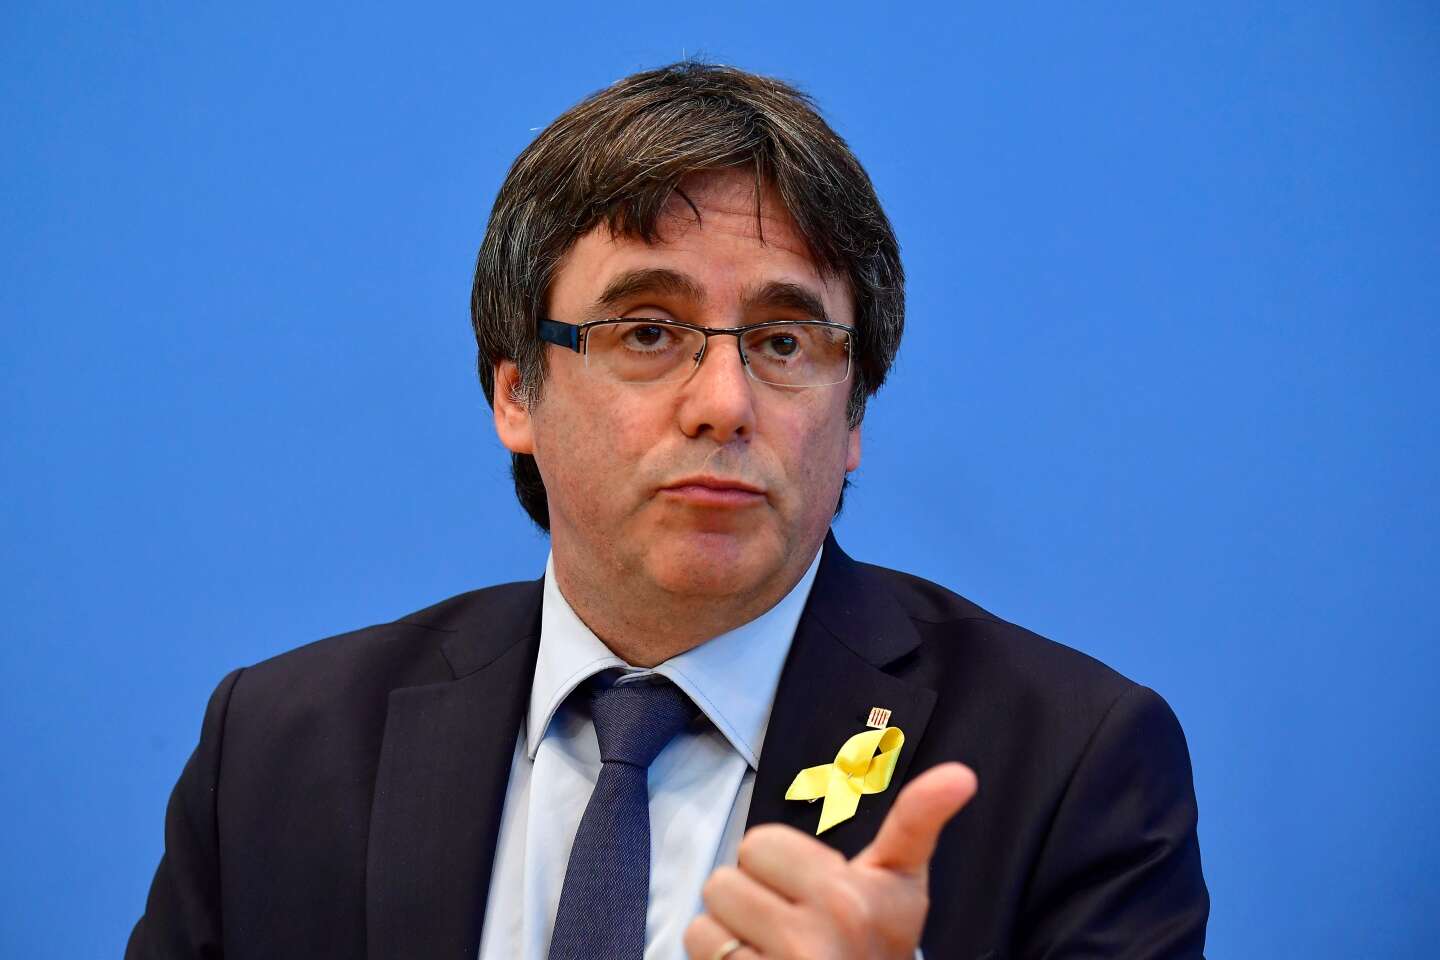 In Spain, the Supreme Court announced the opening of an investigation on charges of “terrorism” against Carles Puigdemont